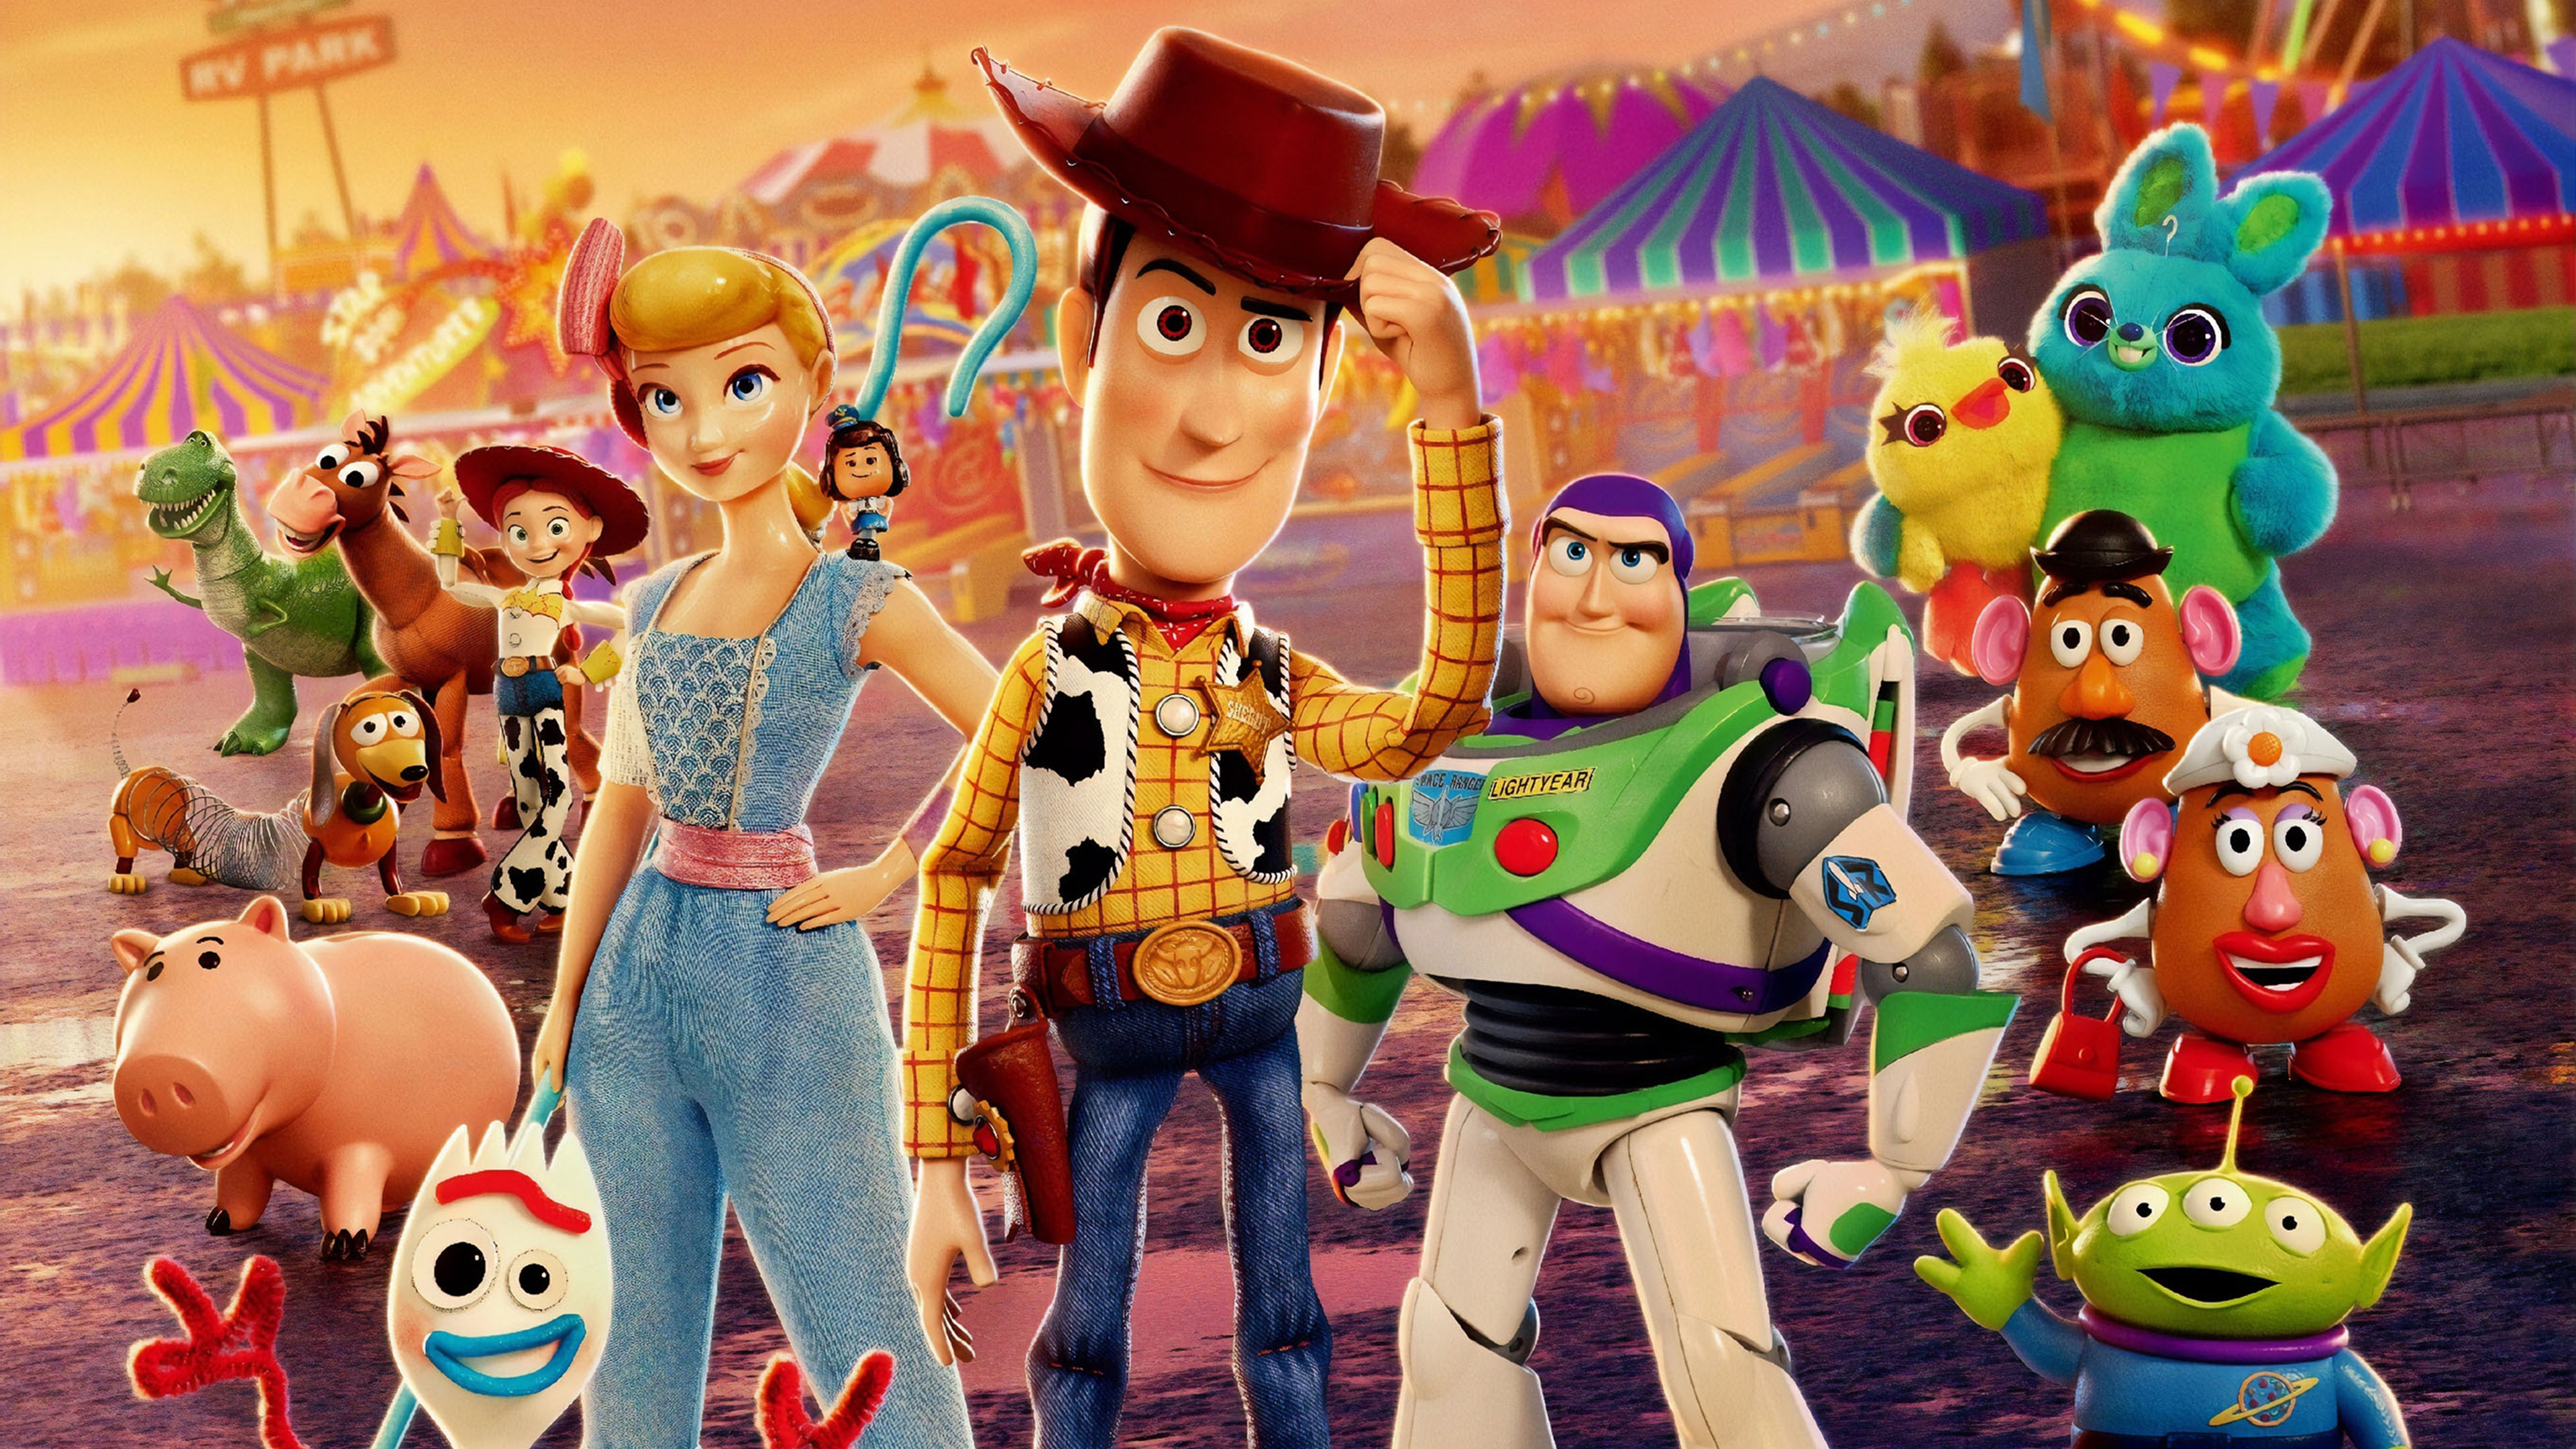 Toy Story 4 Wallpaper - Toy Story 4 Wallpapers Hd - HD Wallpaper 